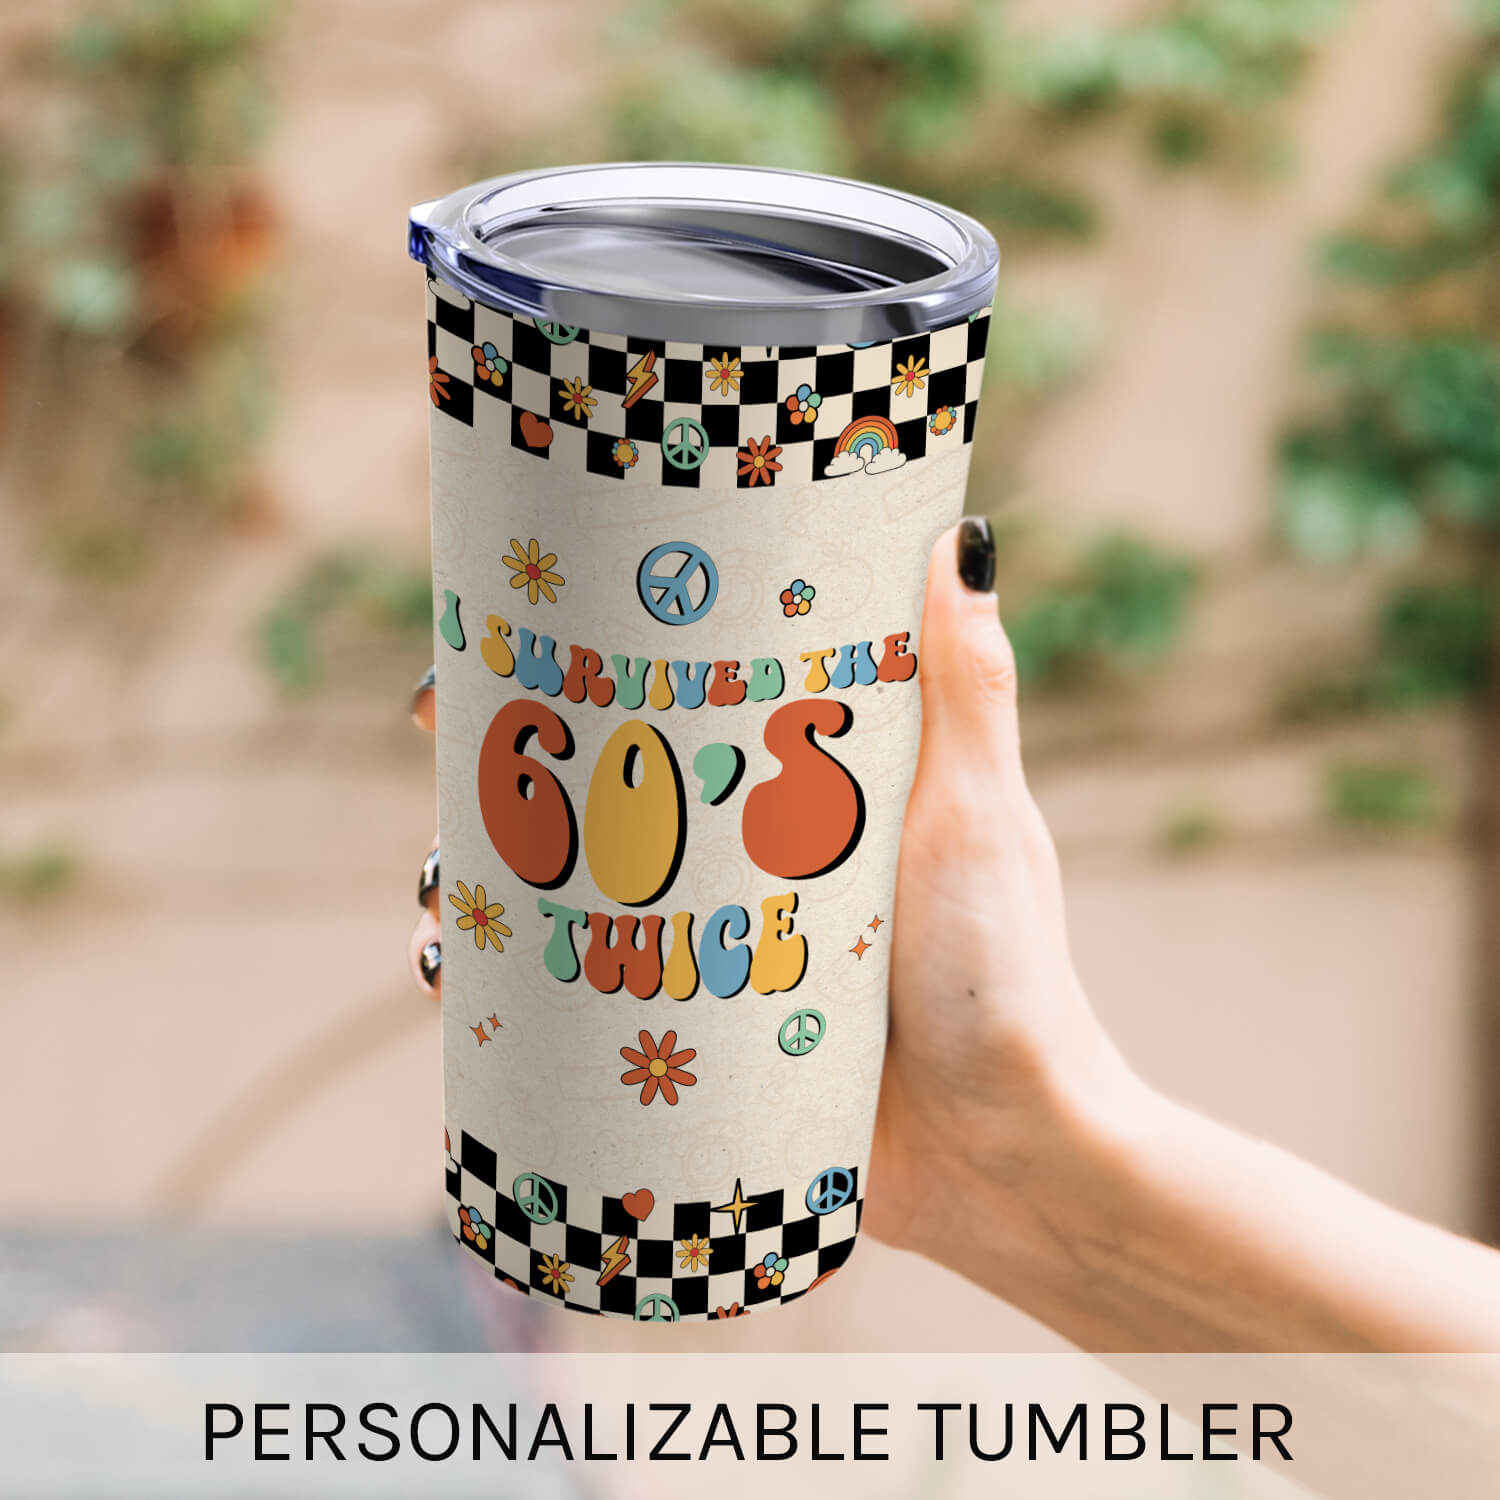 I Survived The 60's Twice - Personalized 70th Birthday gift 70 Year Old - Custom Tumbler - MyMindfulGifts